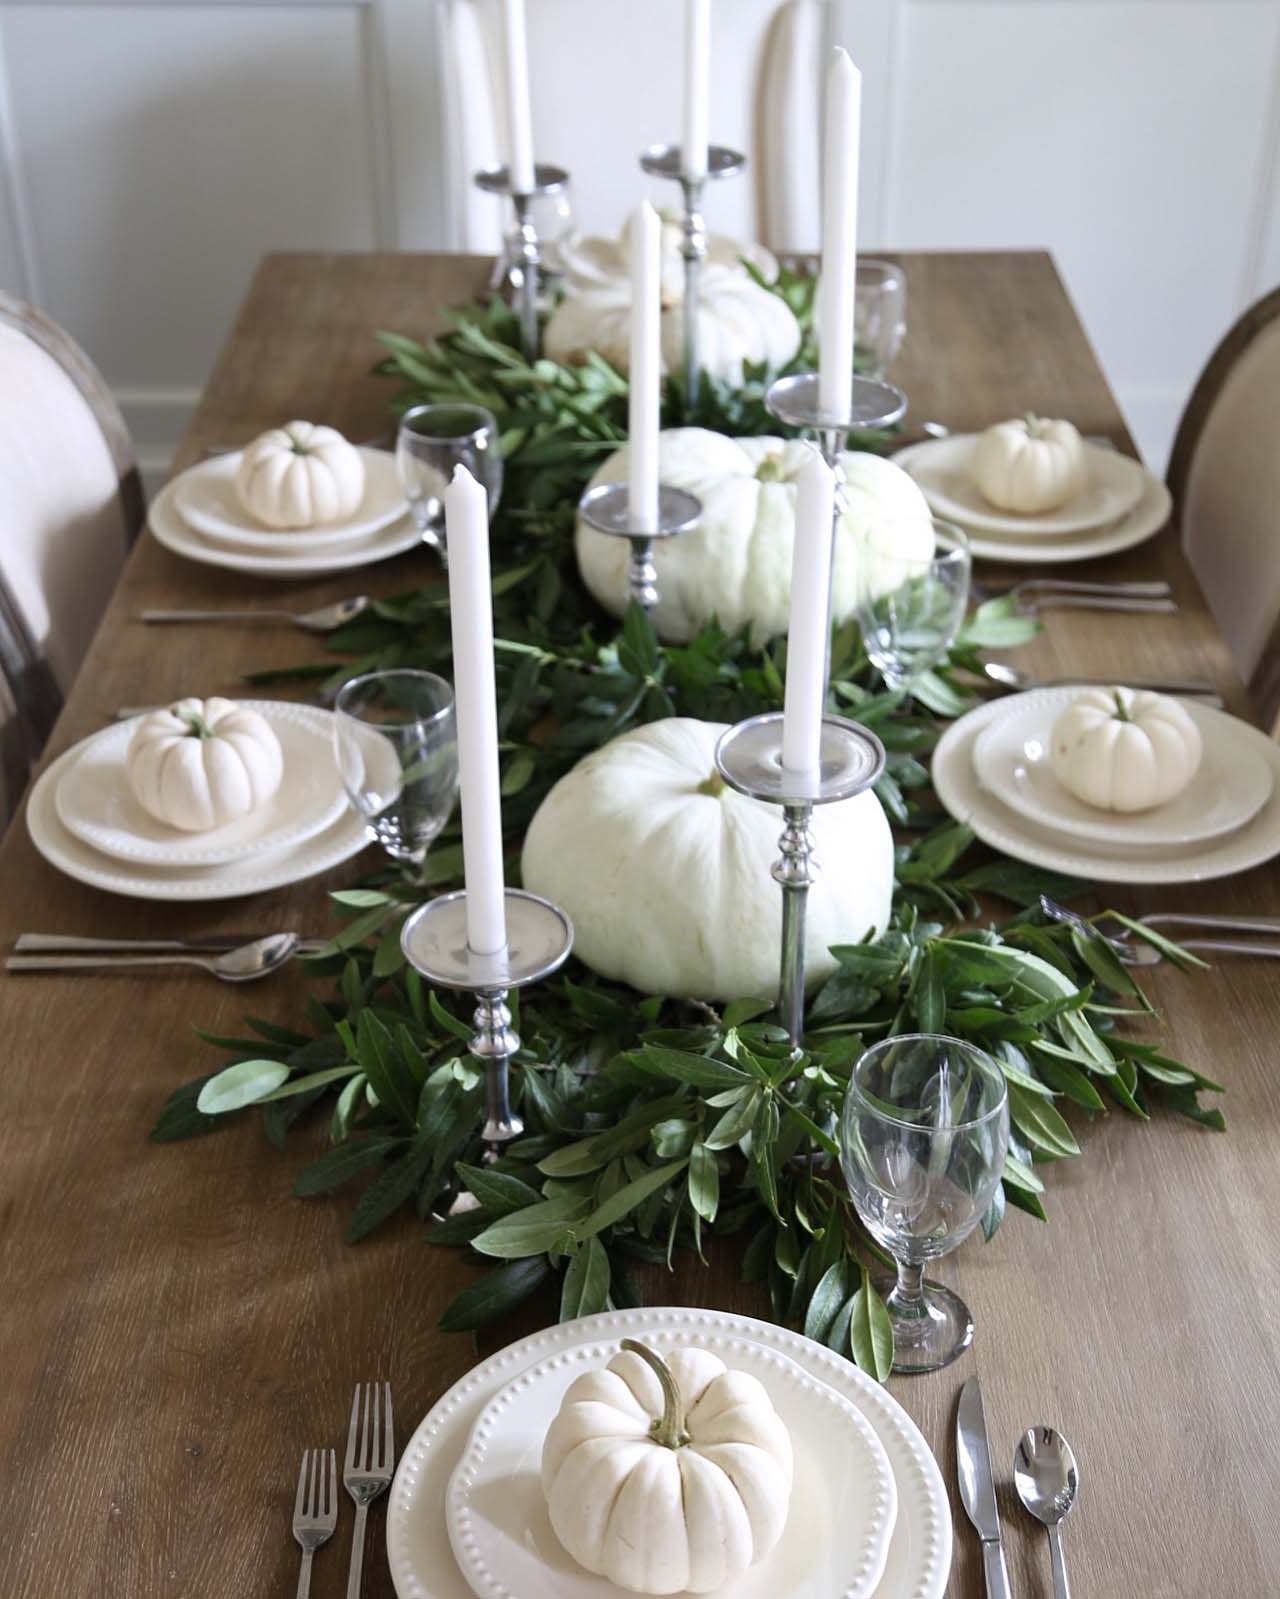 Welcoming fall table decorating ideas 09 1 kindesign.jpg